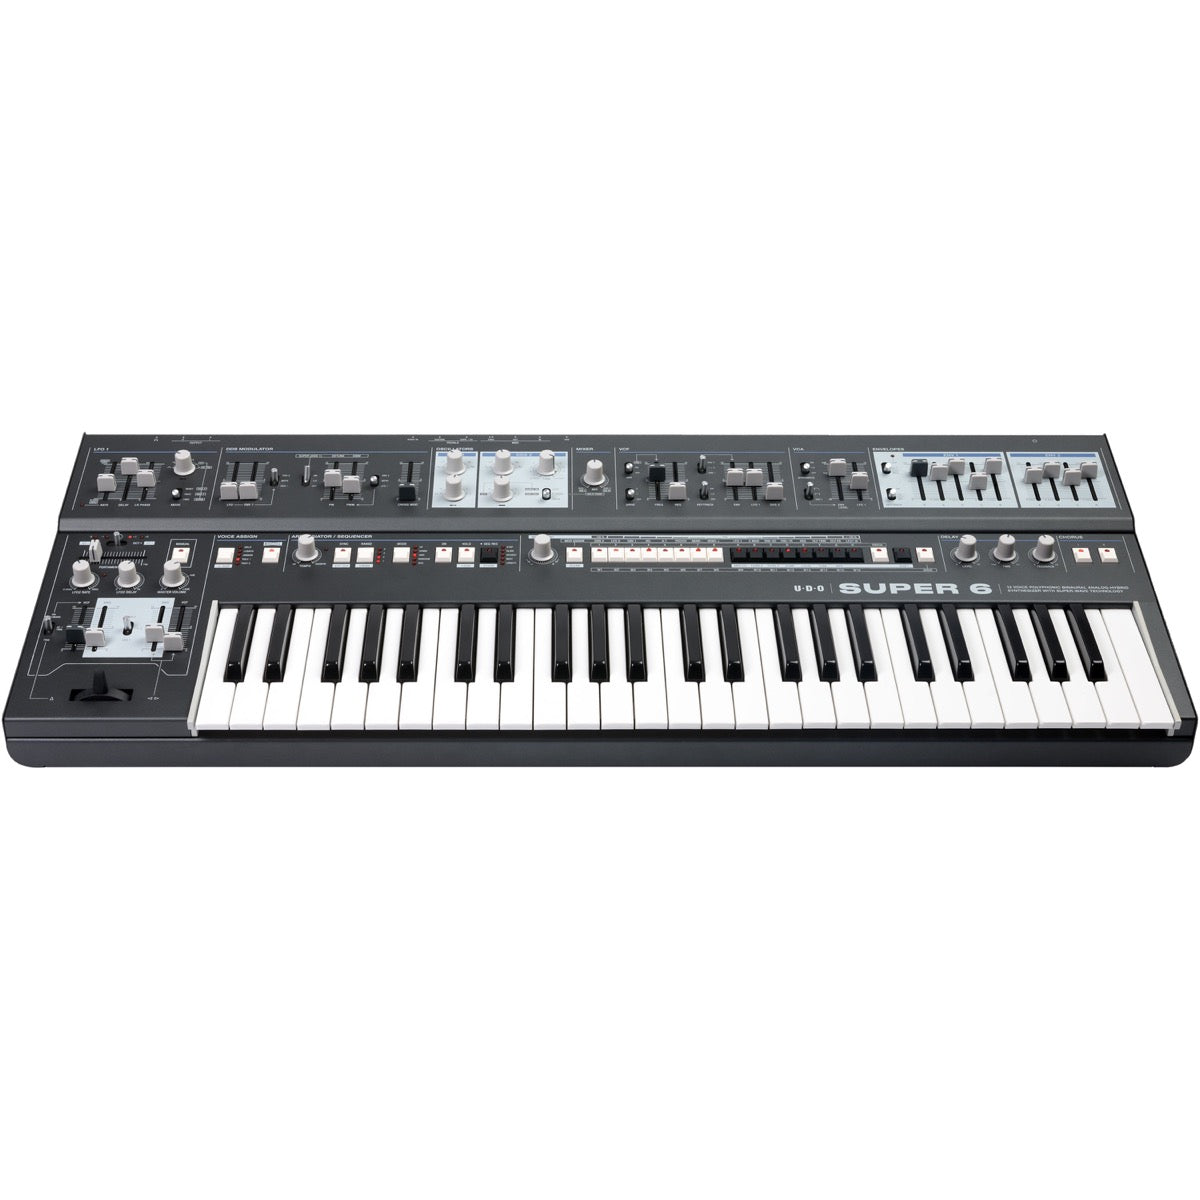 UDO Audio Super 6 12-Voice Polyphonic Keyboard Synthesizer - Black View 3